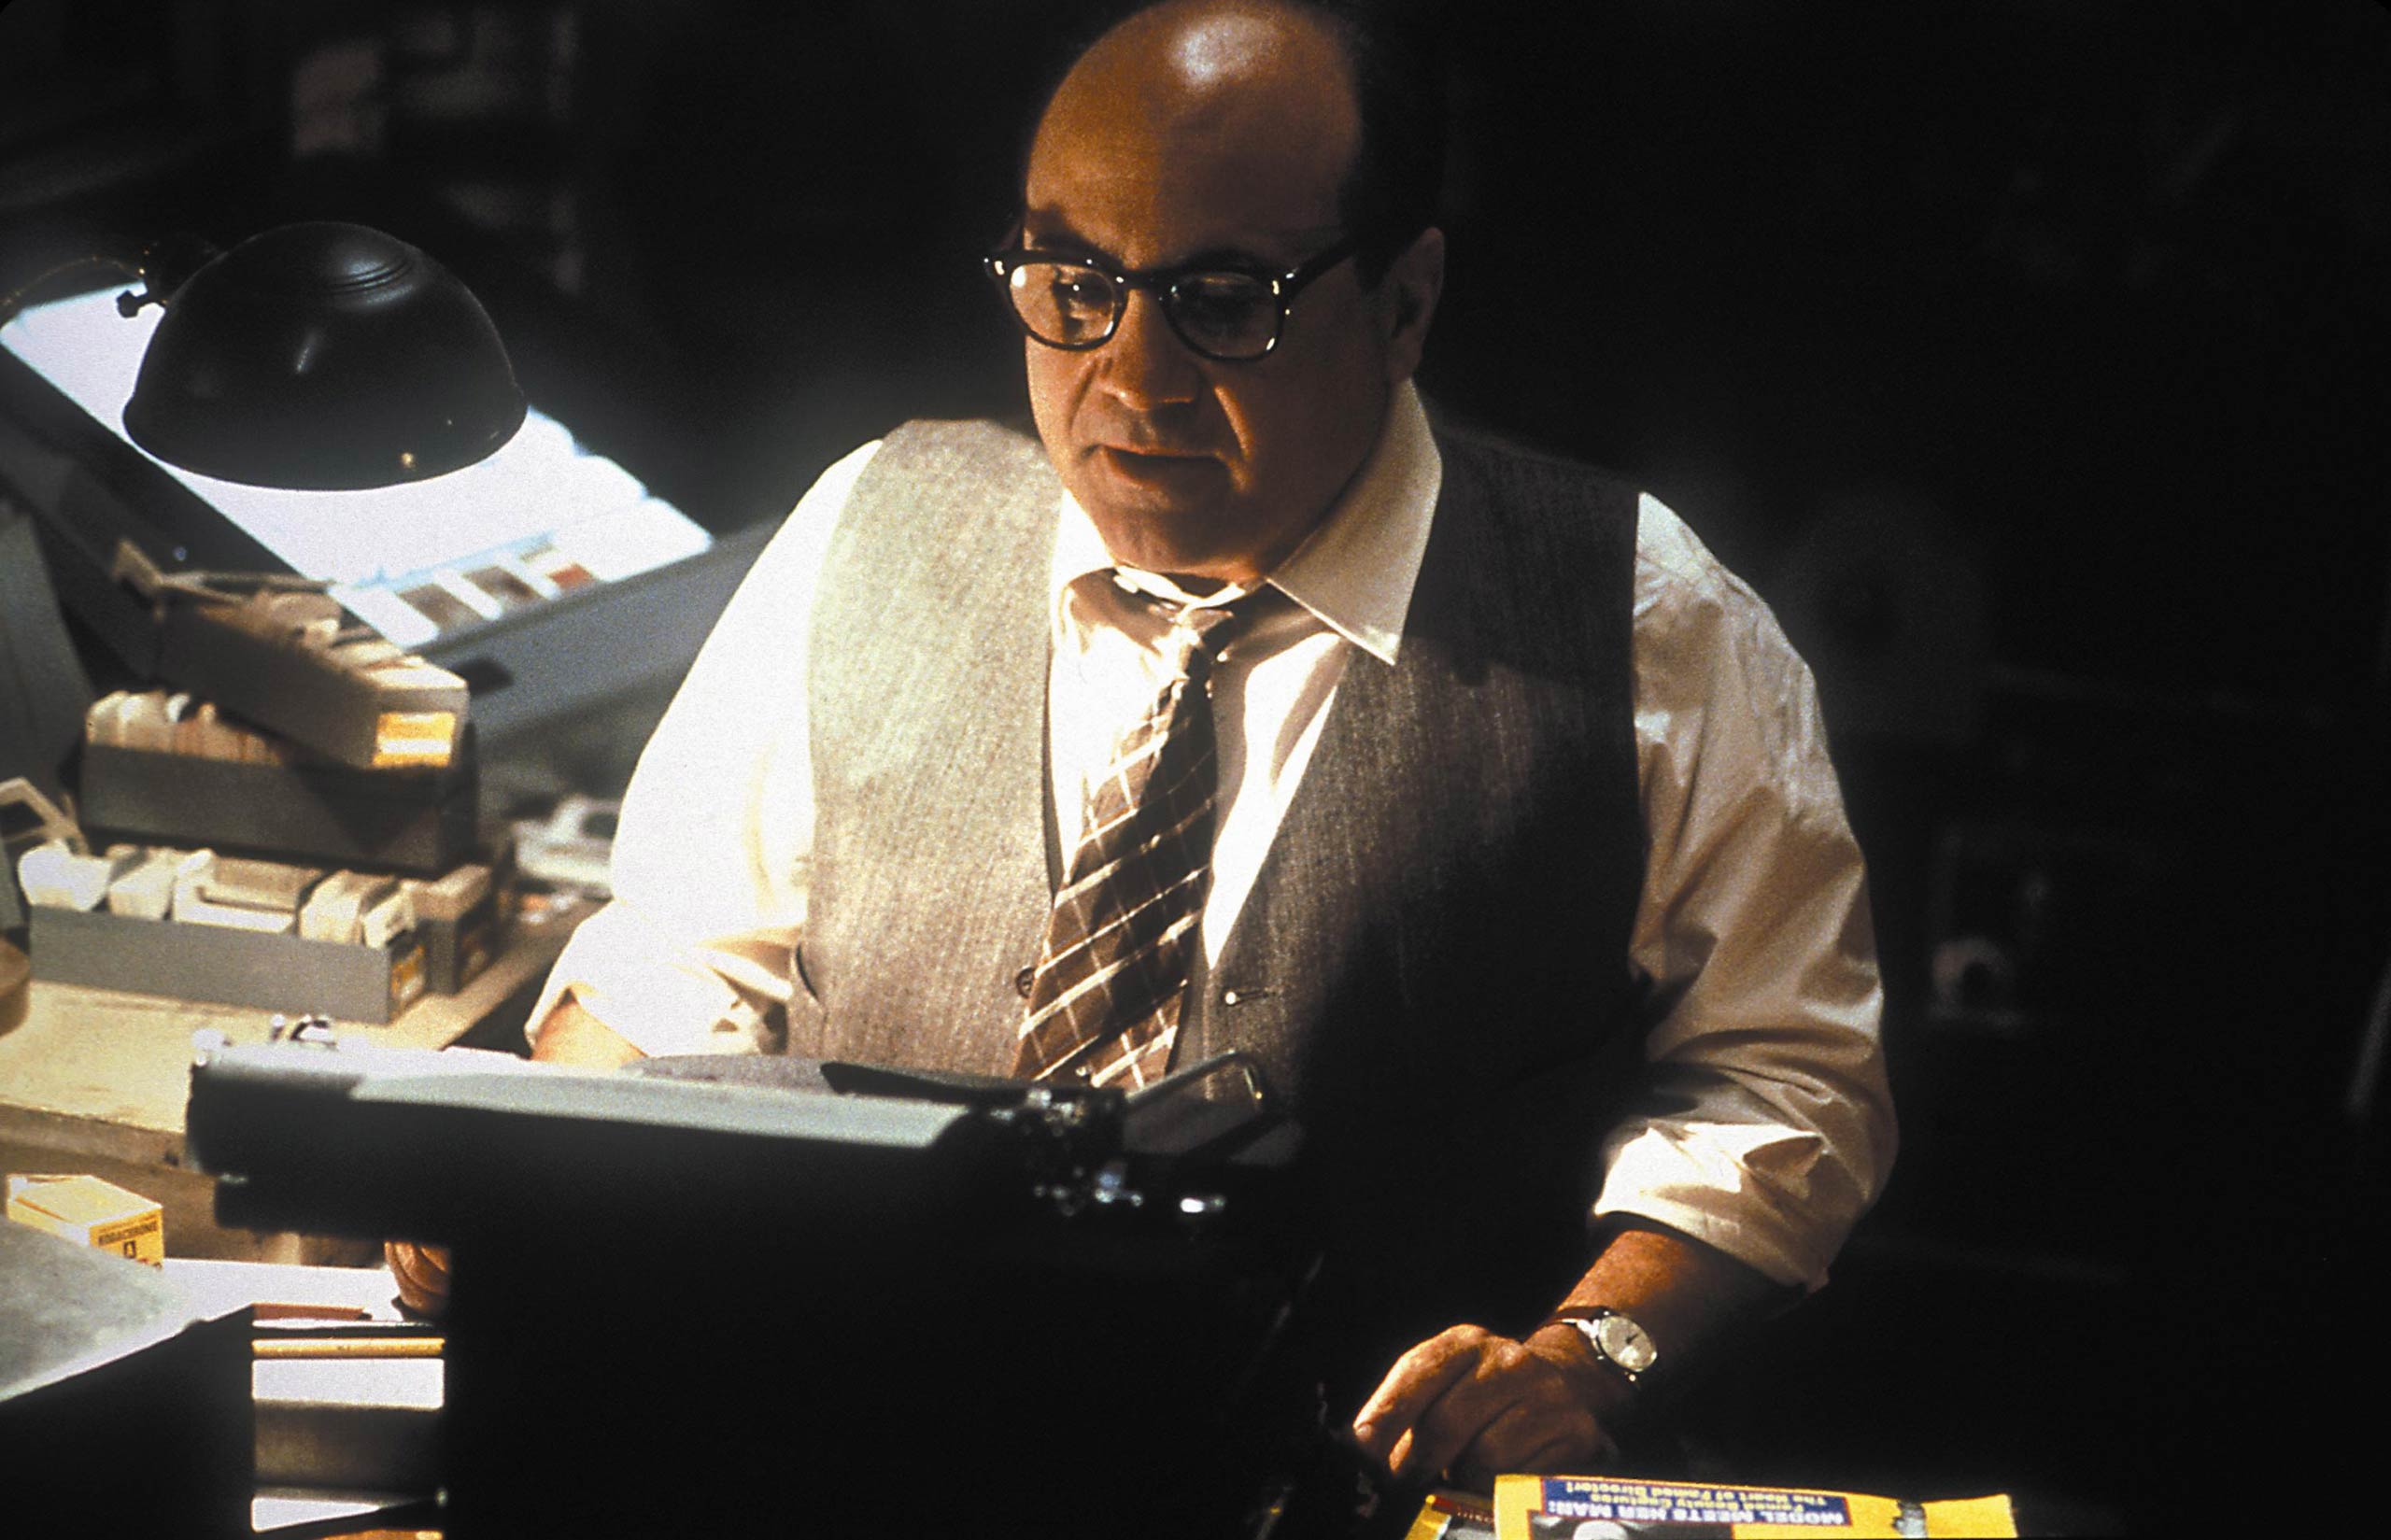 Thought he didn't have much screen time, DeVito played an instrumental role in establishing the mid-century Hollywood gossip scene in 'L.A. Confidential' (1997).